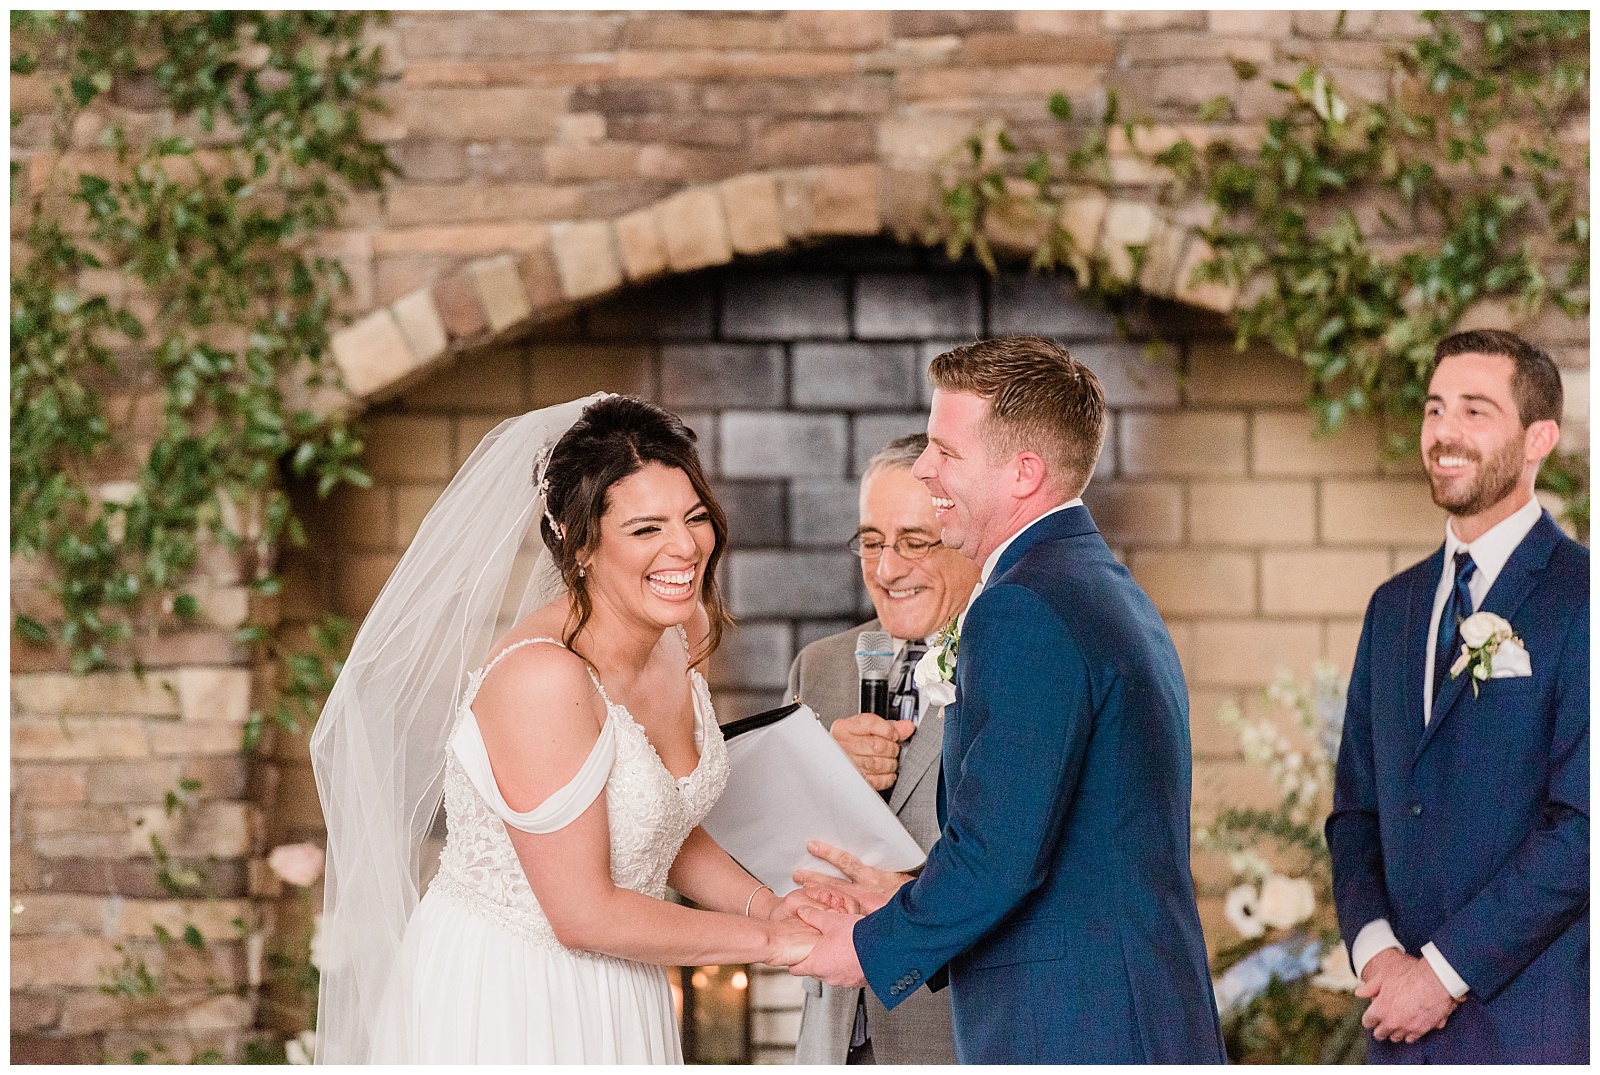 Bride and groom laugh while holding hands during the ceremony in front of a fireplace.